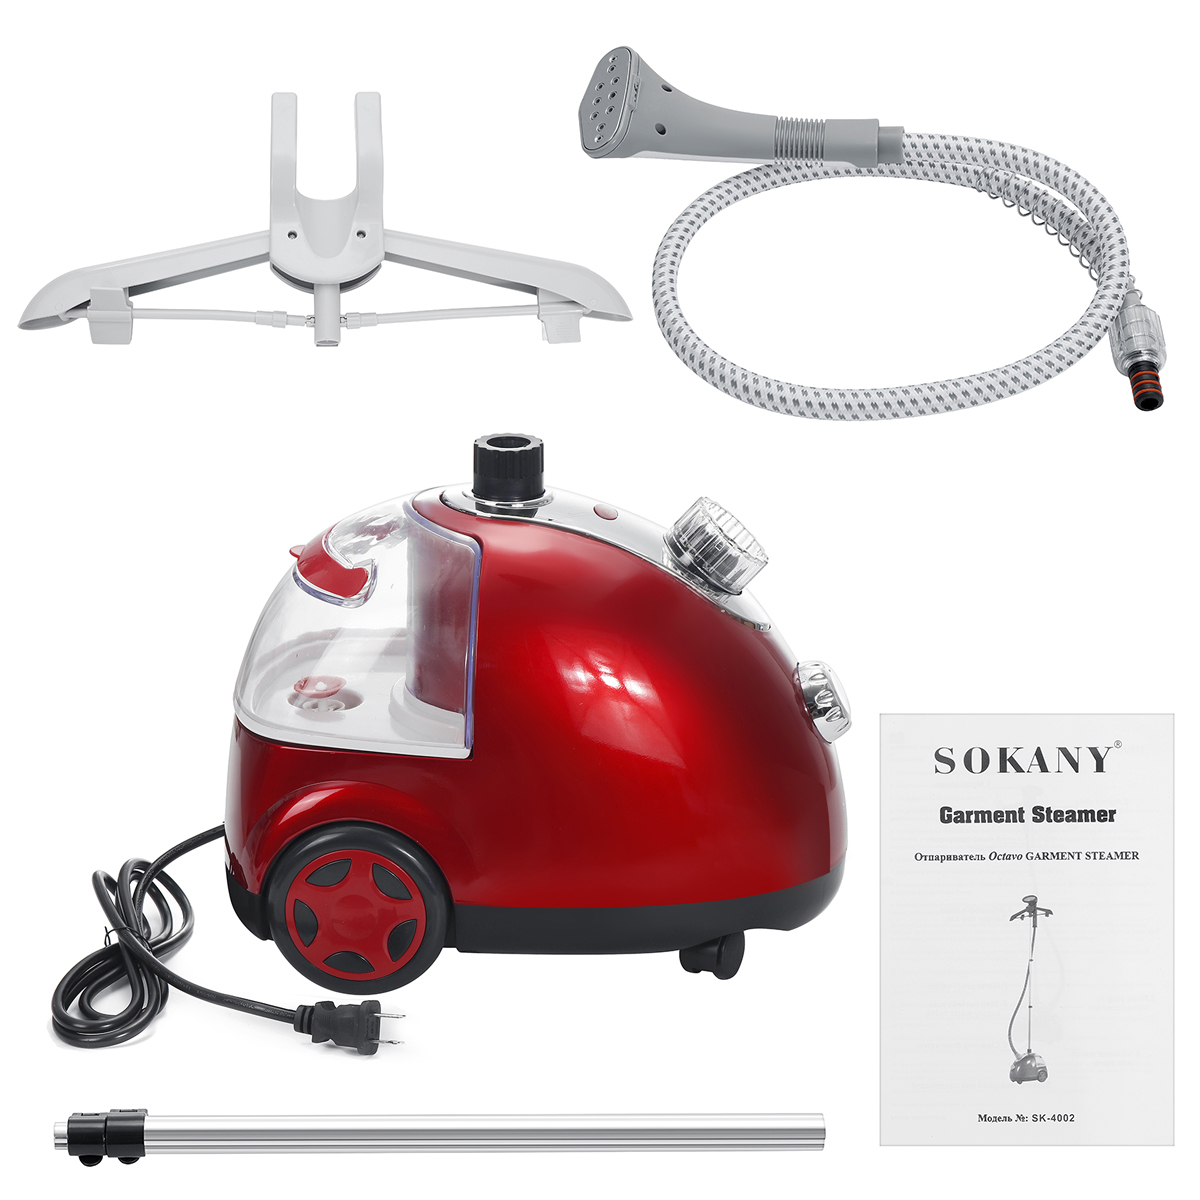 SOKANY-2000W-Clothing-Garment-Steamer-Portable-Fabric-Steamer-Vertical-Iron-Machine-for-Clothes-with-1937409-6